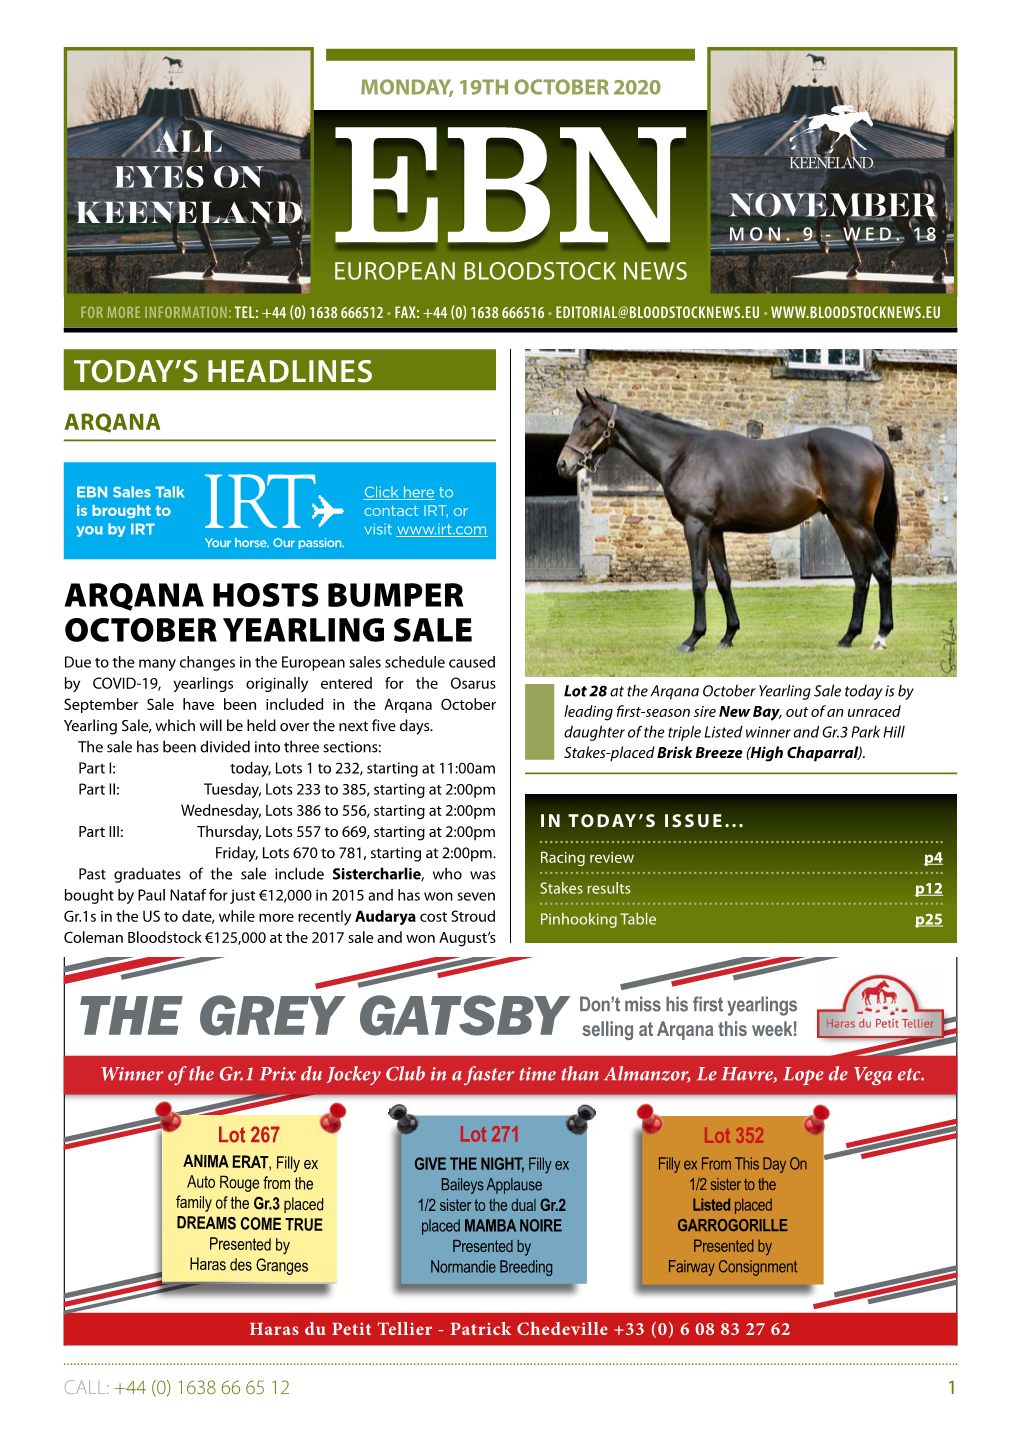 THE GREY GATSBY Selling at Arqana This Week! Winner of the Gr.1 Prix Du Jockey Club in a Faster Time Than Almanzor, Le Havre, Lope De Vega Etc